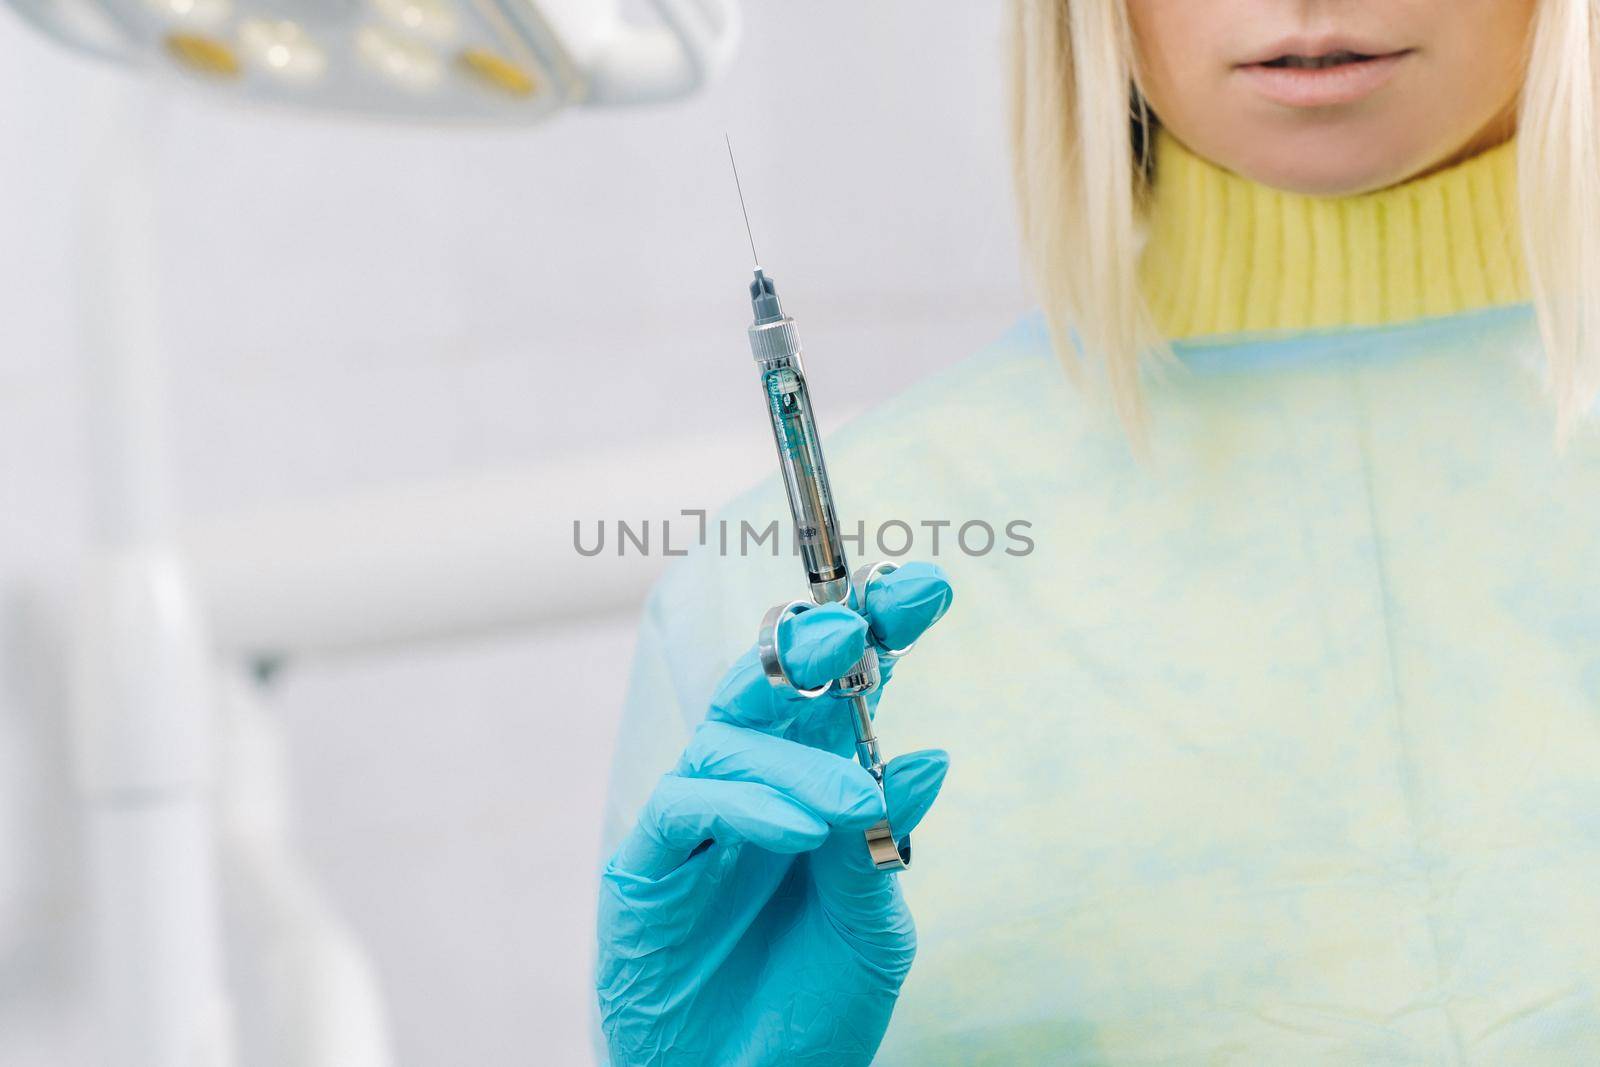 The dentist holds an injection syringe for the patient in the office.